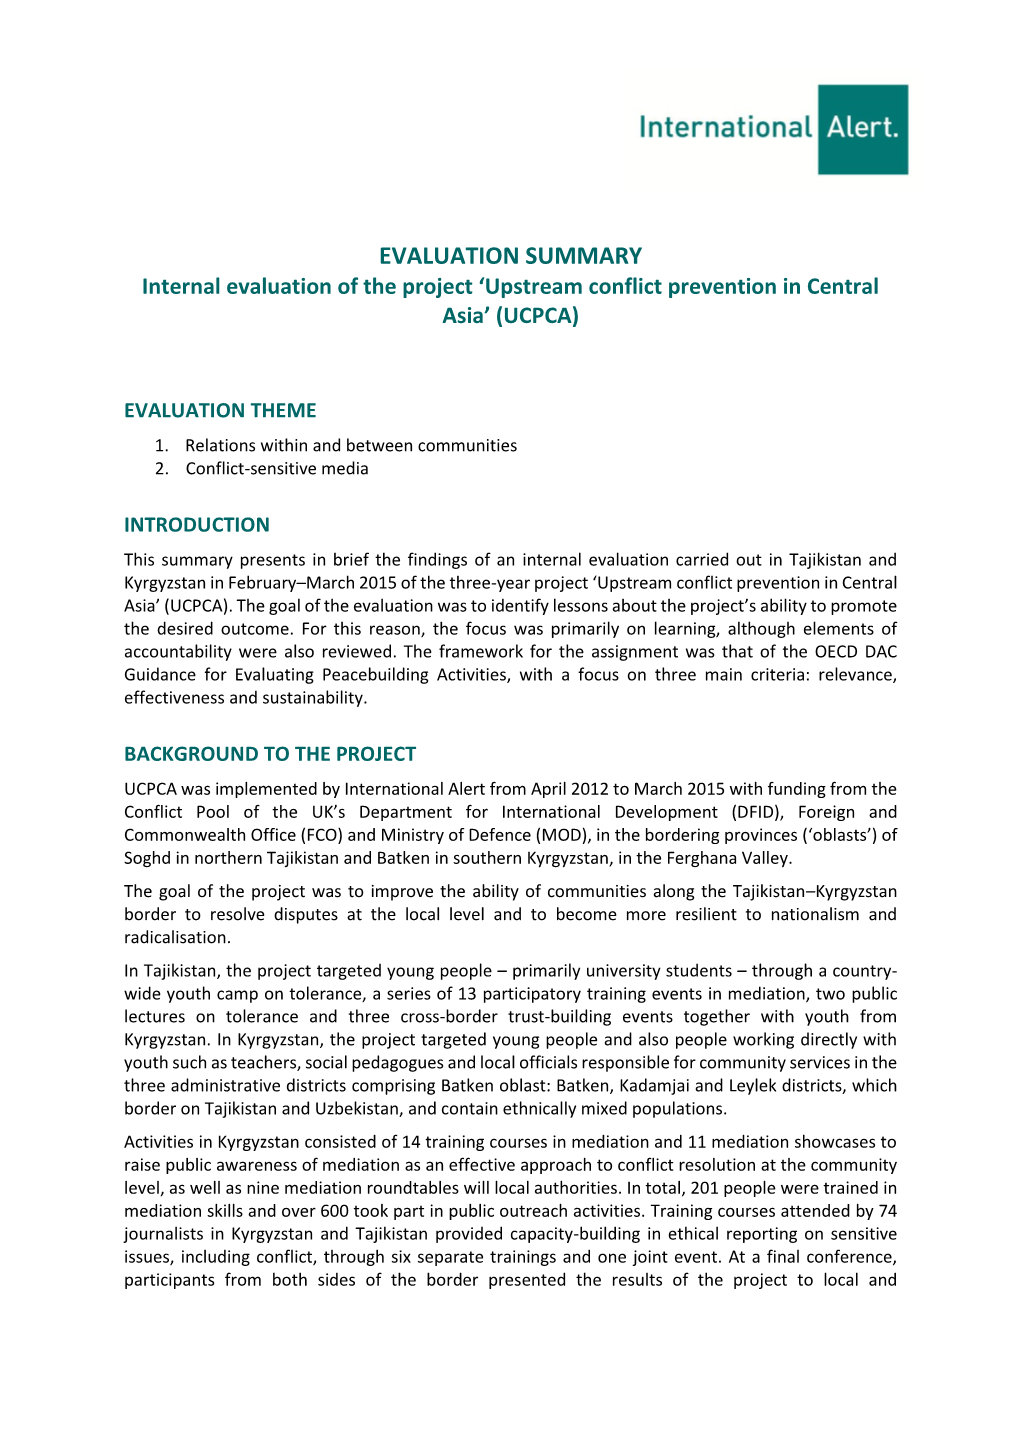 EVALUATION SUMMARY Internal Evaluation of the Project ‘Upstream Conflict Prevention in Central Asia’ (UCPCA)